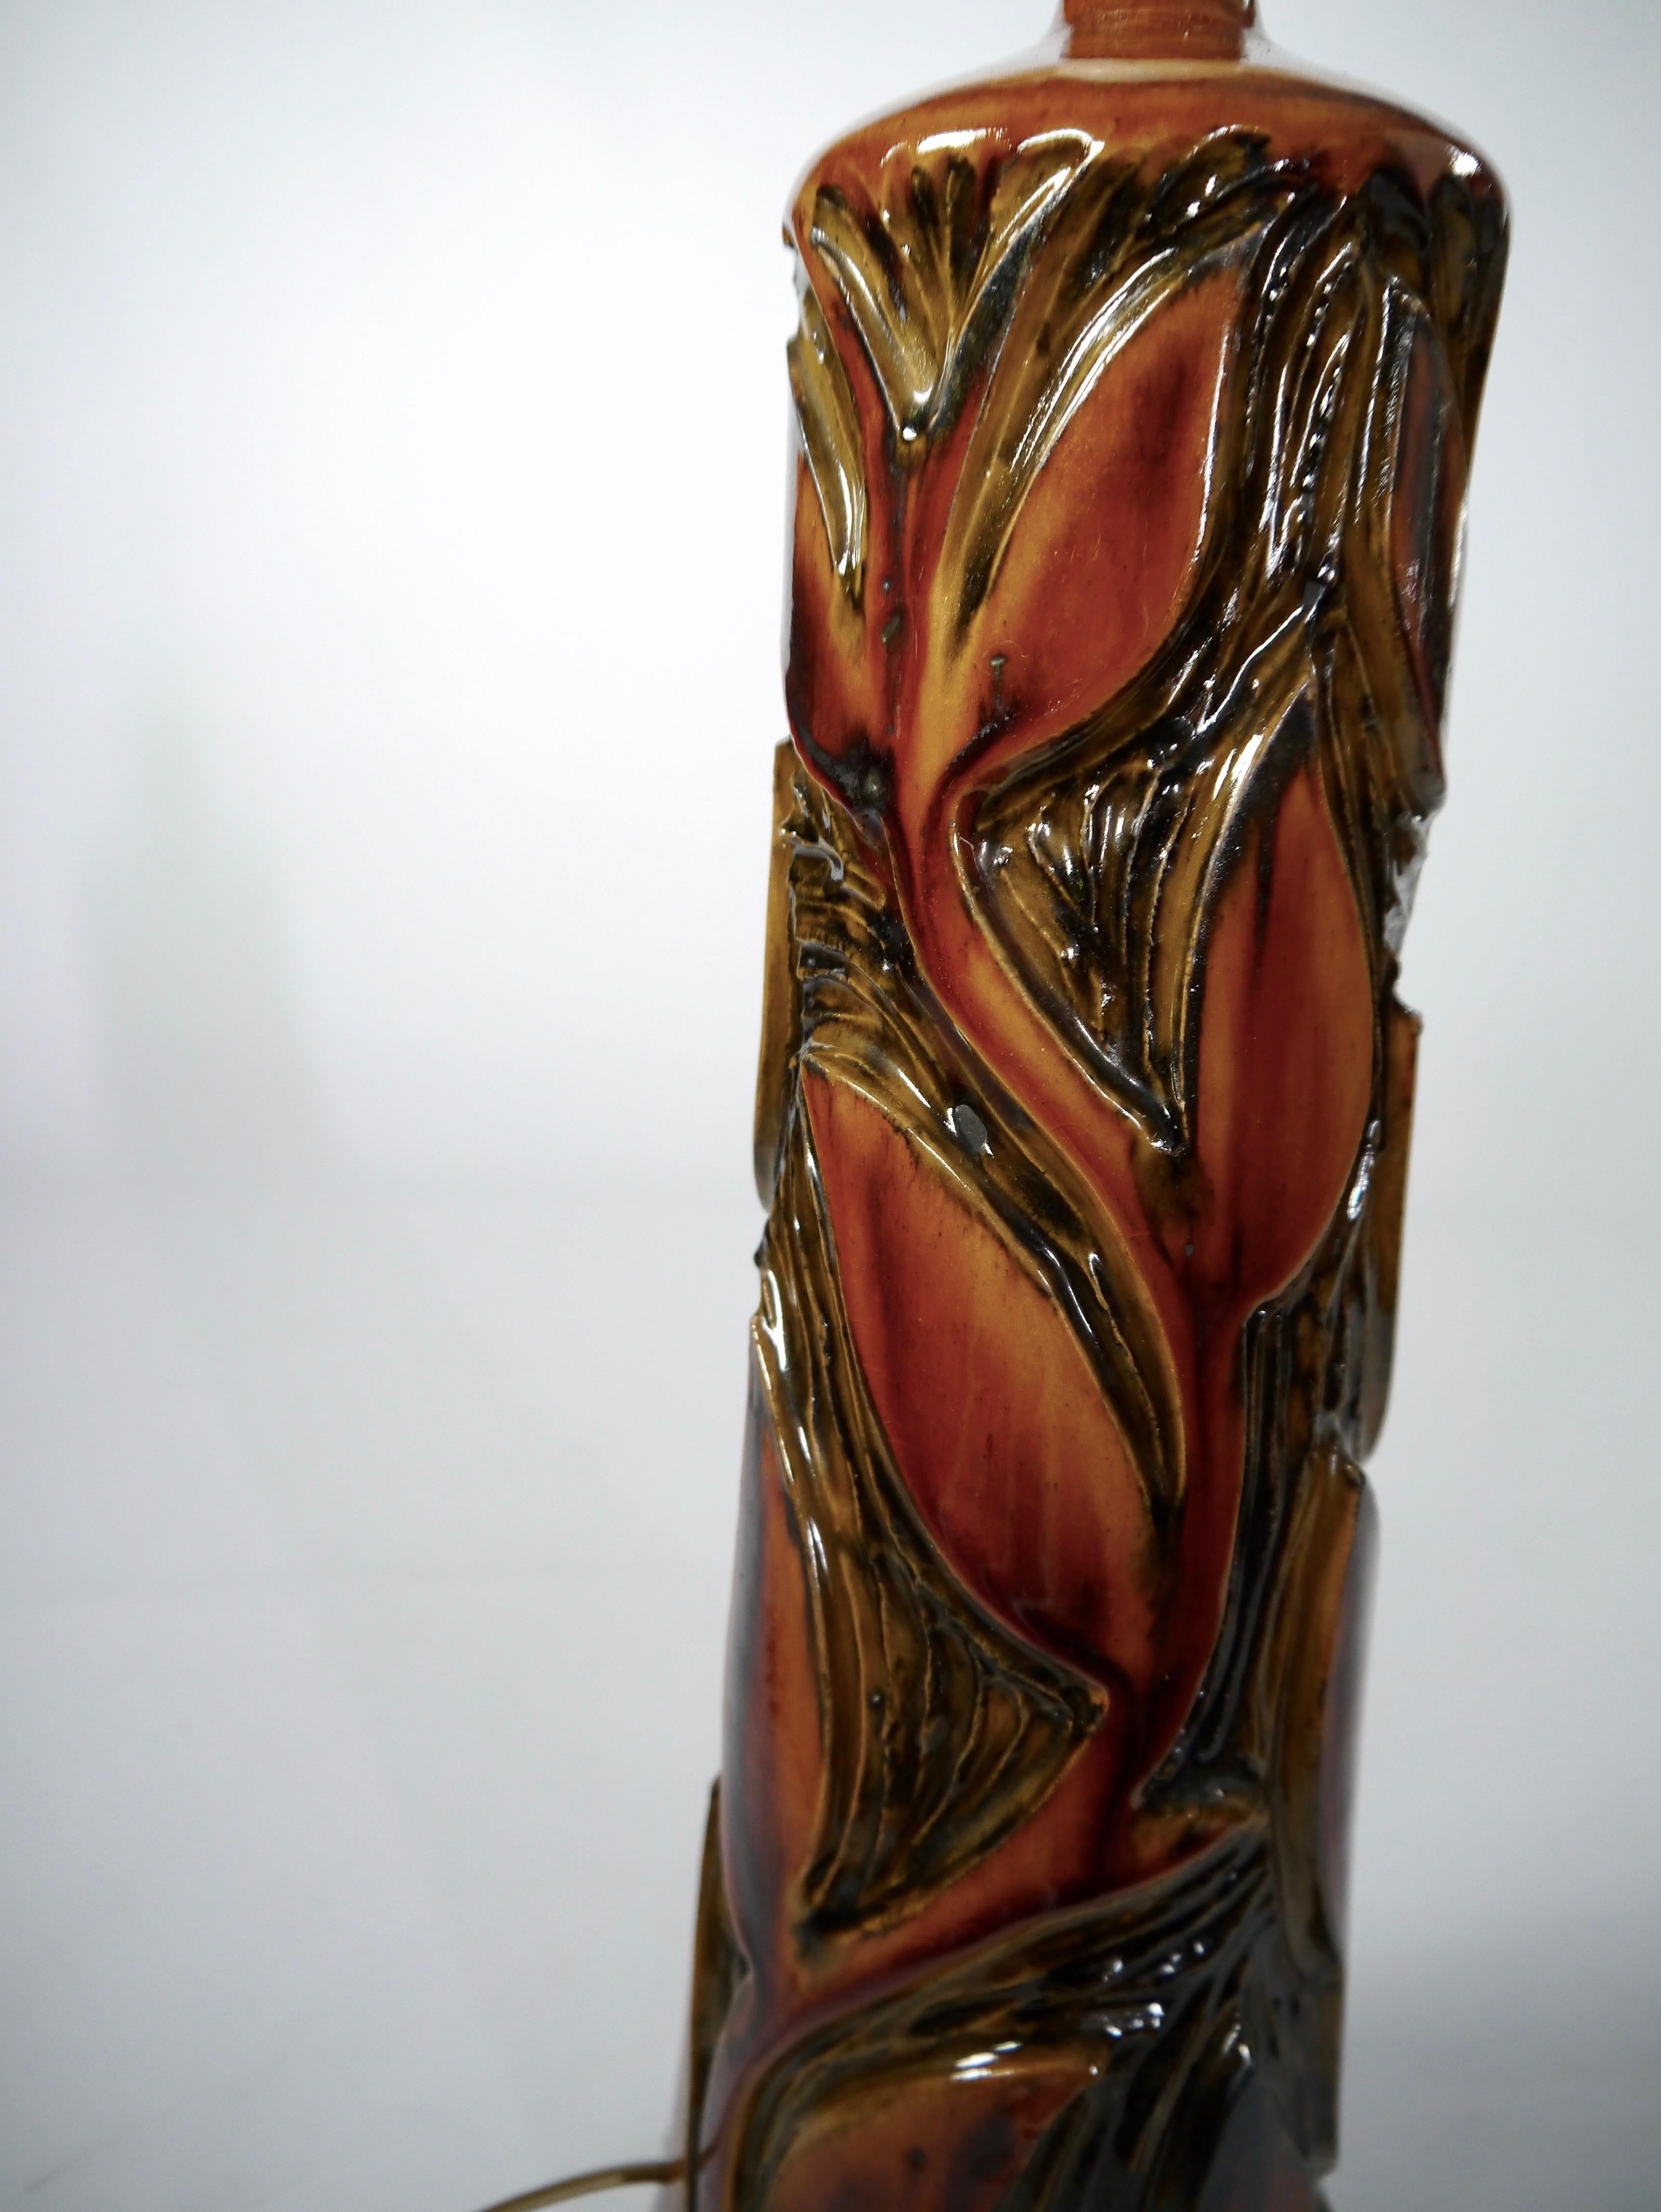 Norwegian Tall Ceramic Table Lamp, by Rolf Tiemroth, Norway, 1970s For Sale